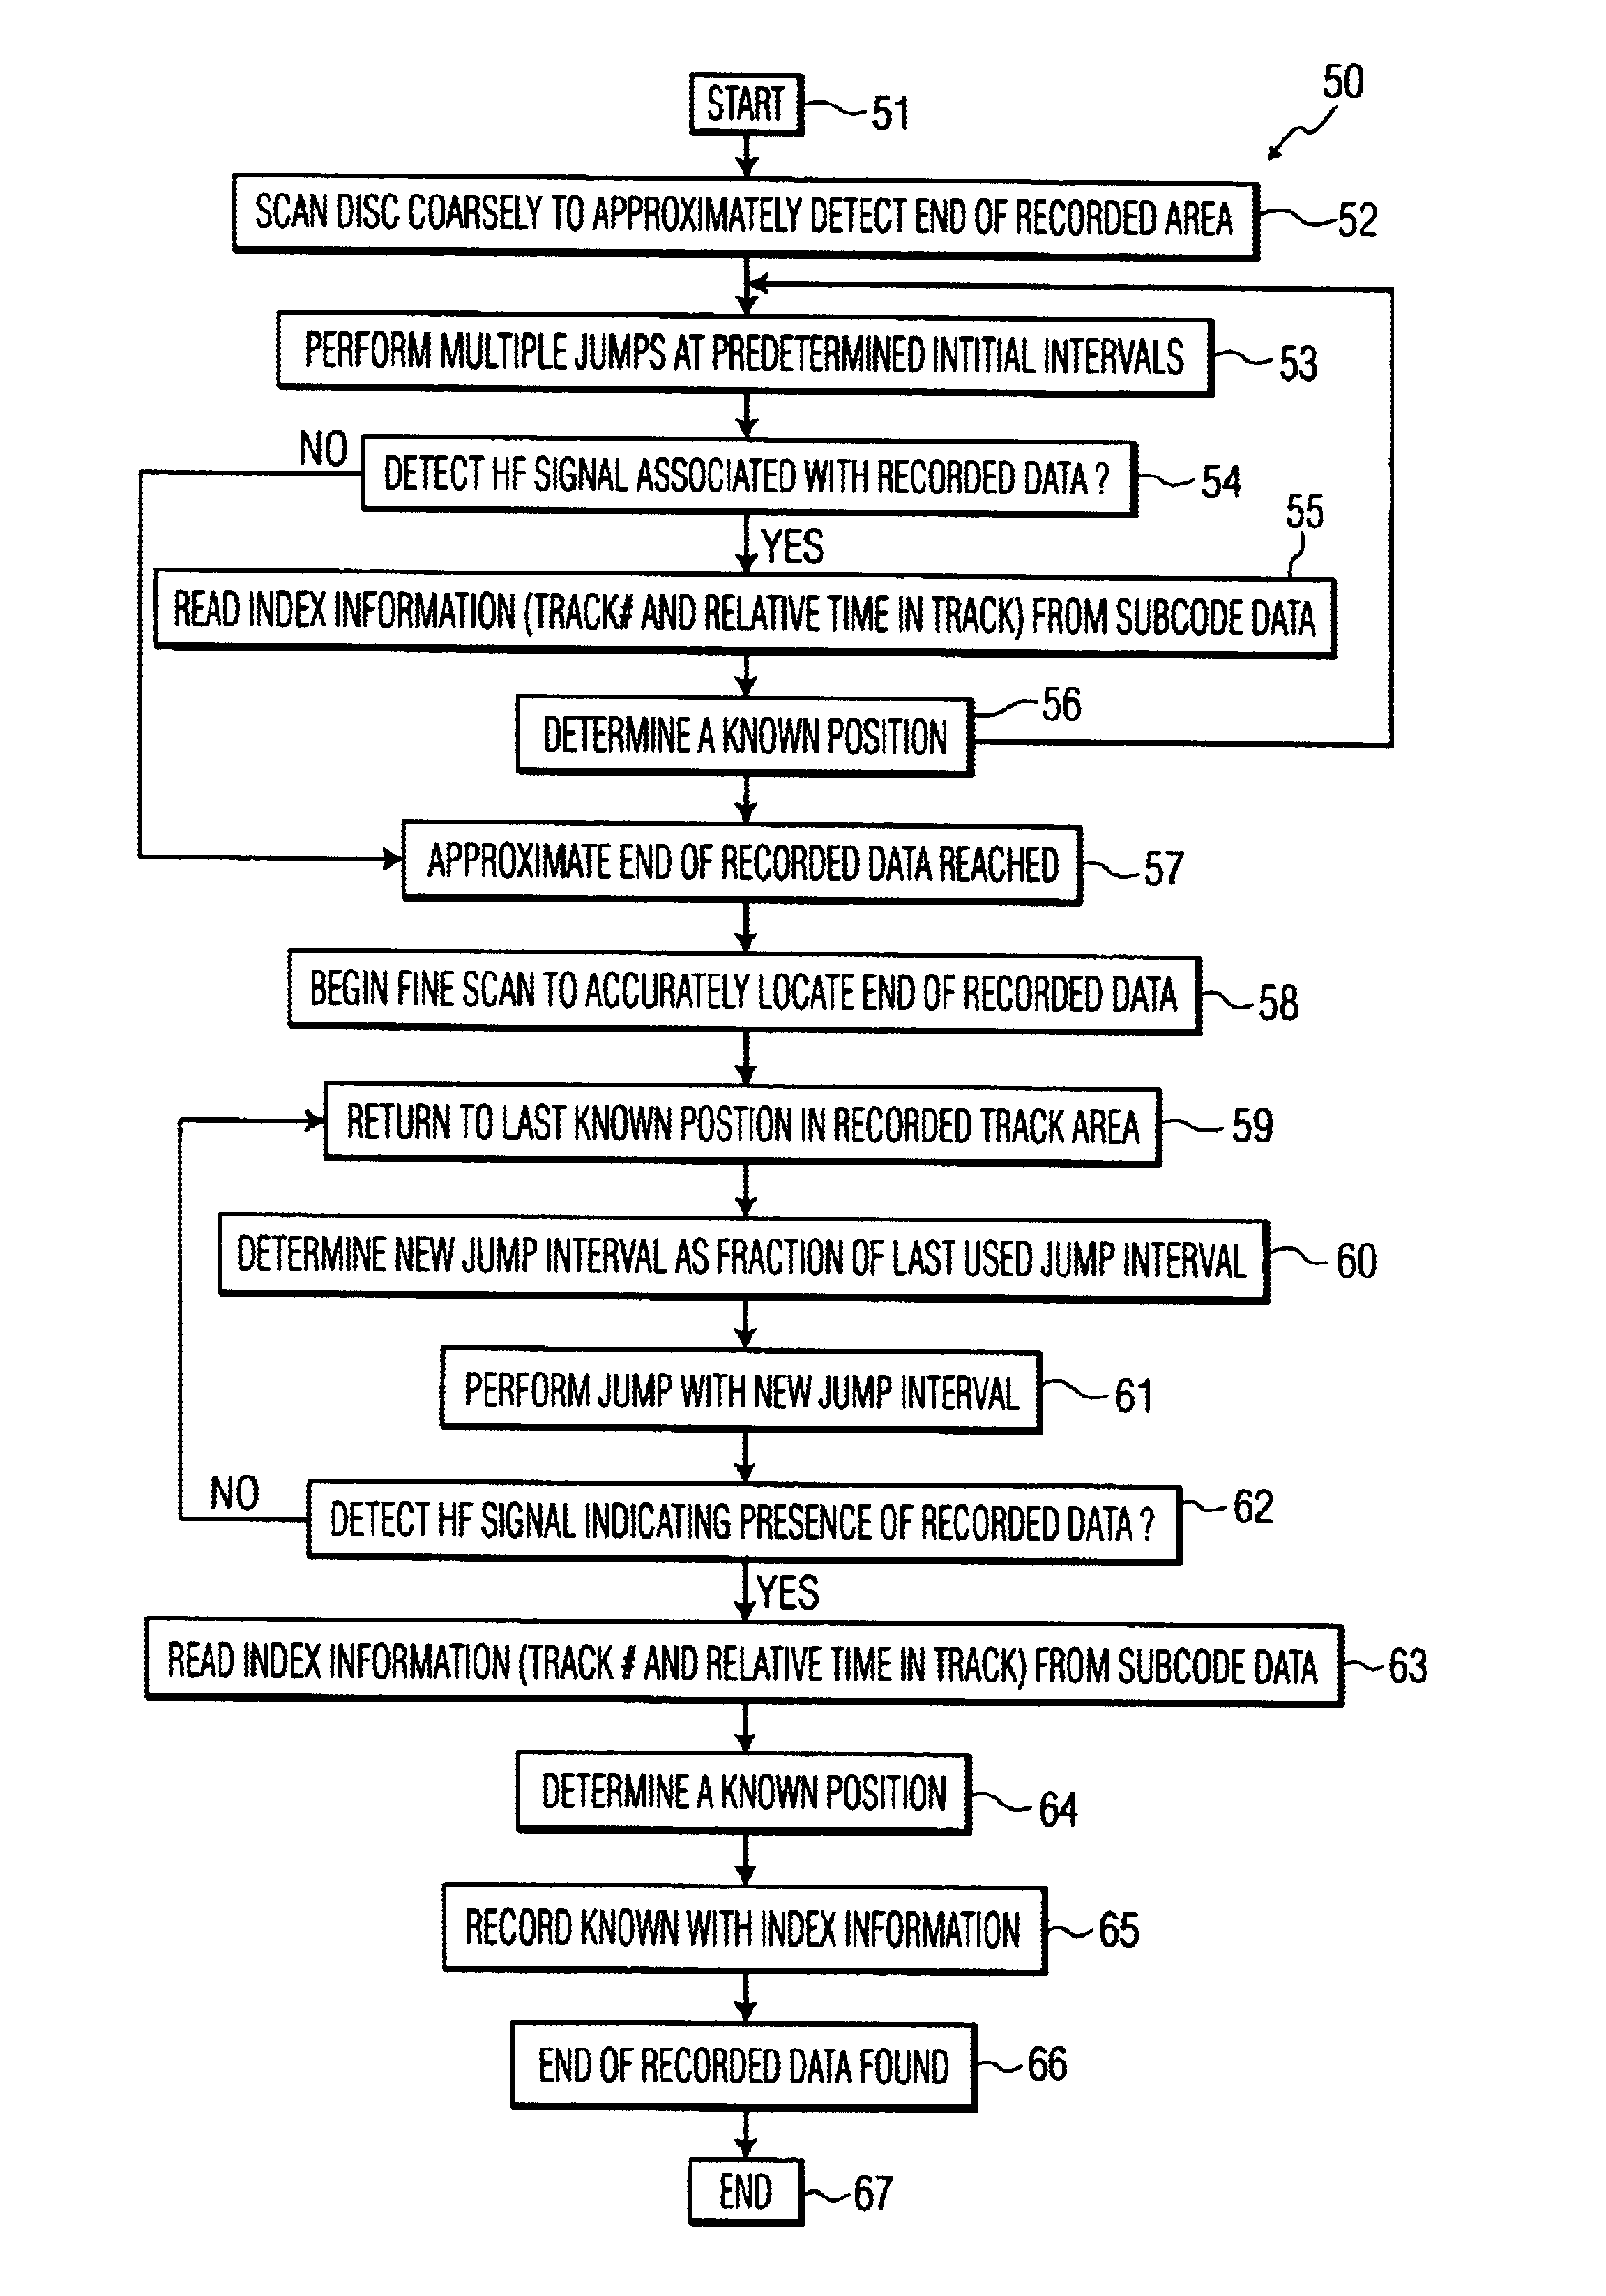 Apparatus for reproducing information from data-carrying disks